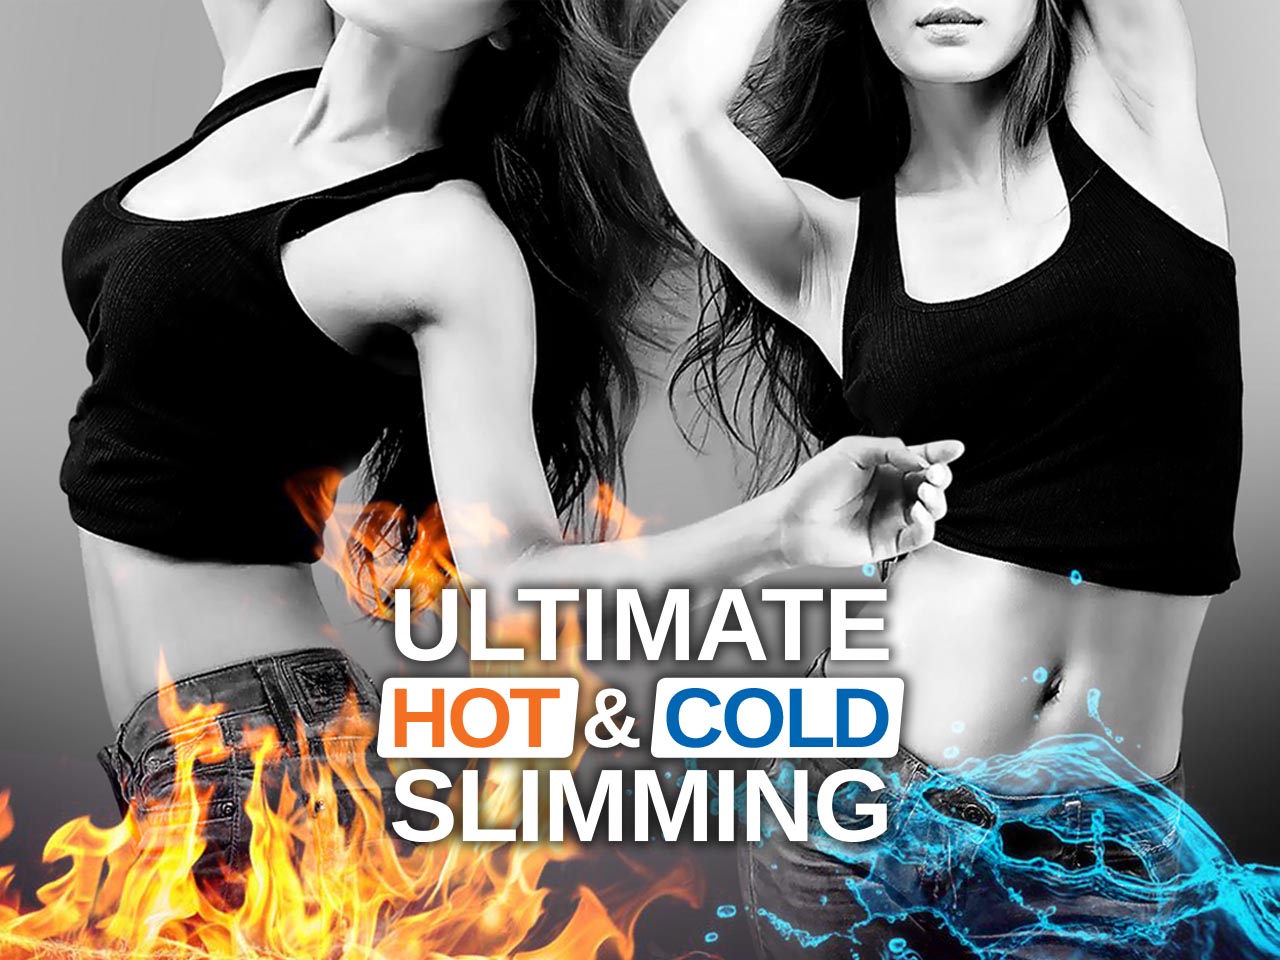 Ultimate Hot & Cold Slimming 01